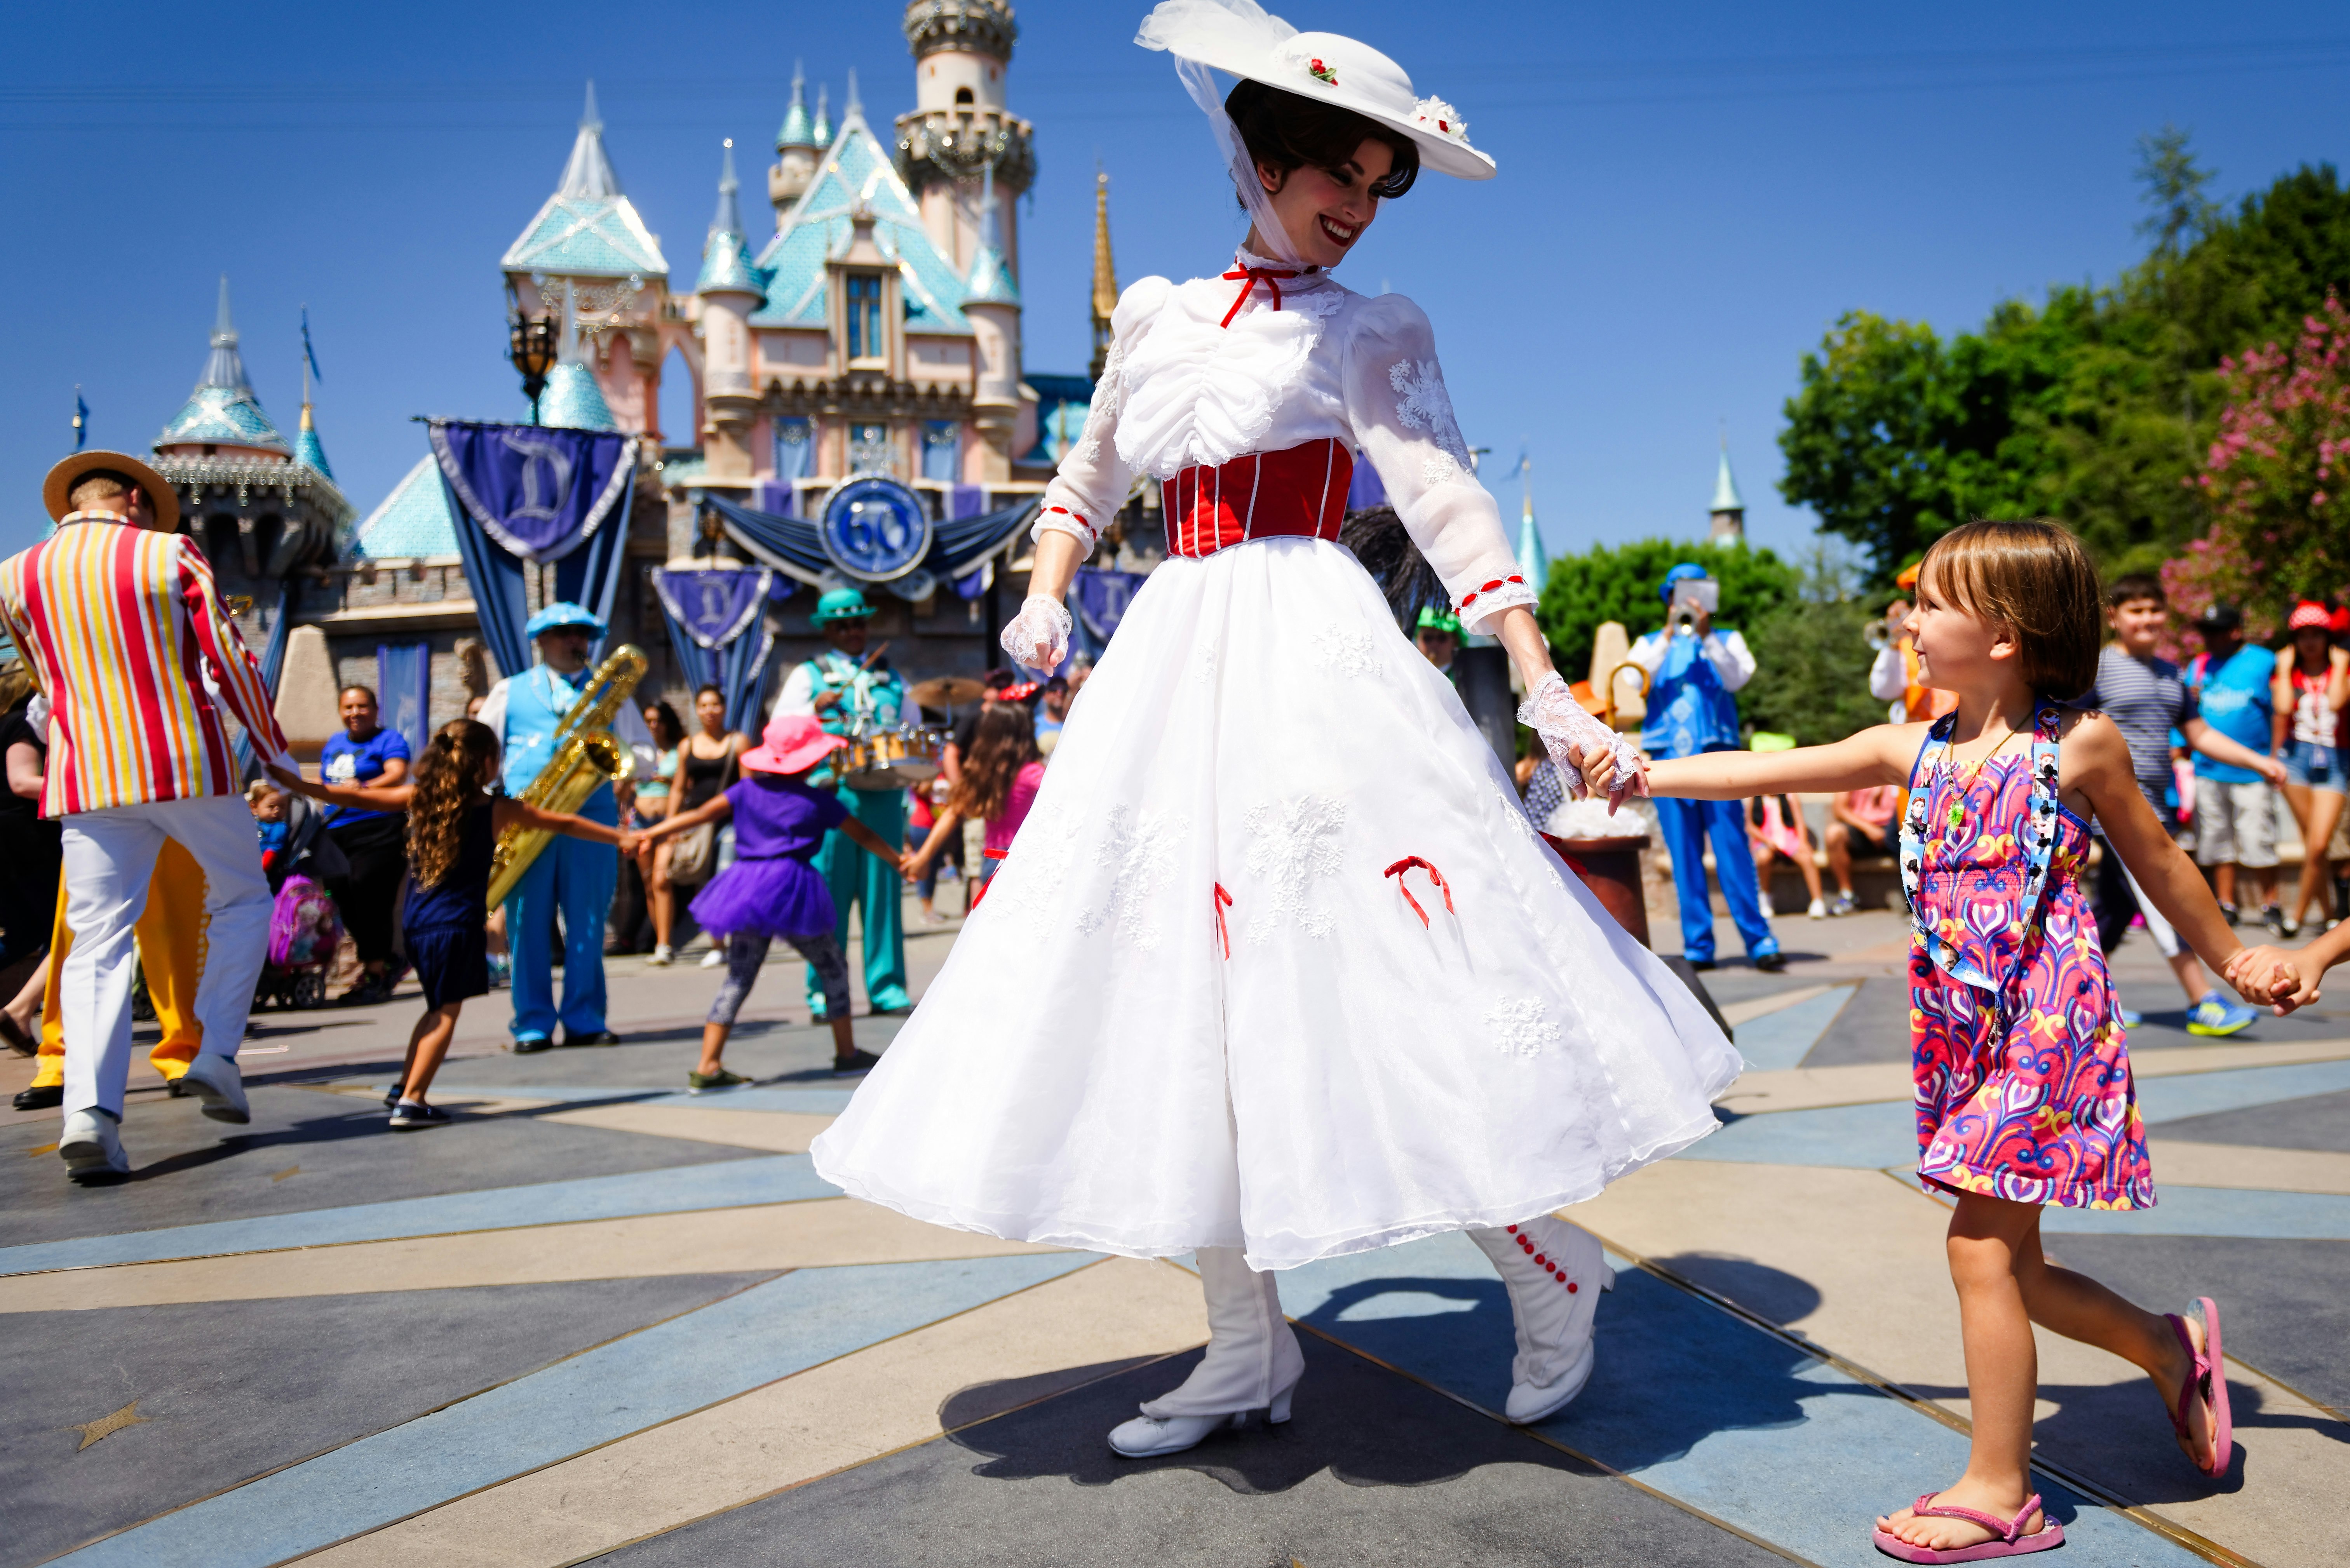 Mary Poppins smiles at a young child as she leads a line of children in song and dance in front of Cinderella's castle during Disney's 60th Diamond Celebration.